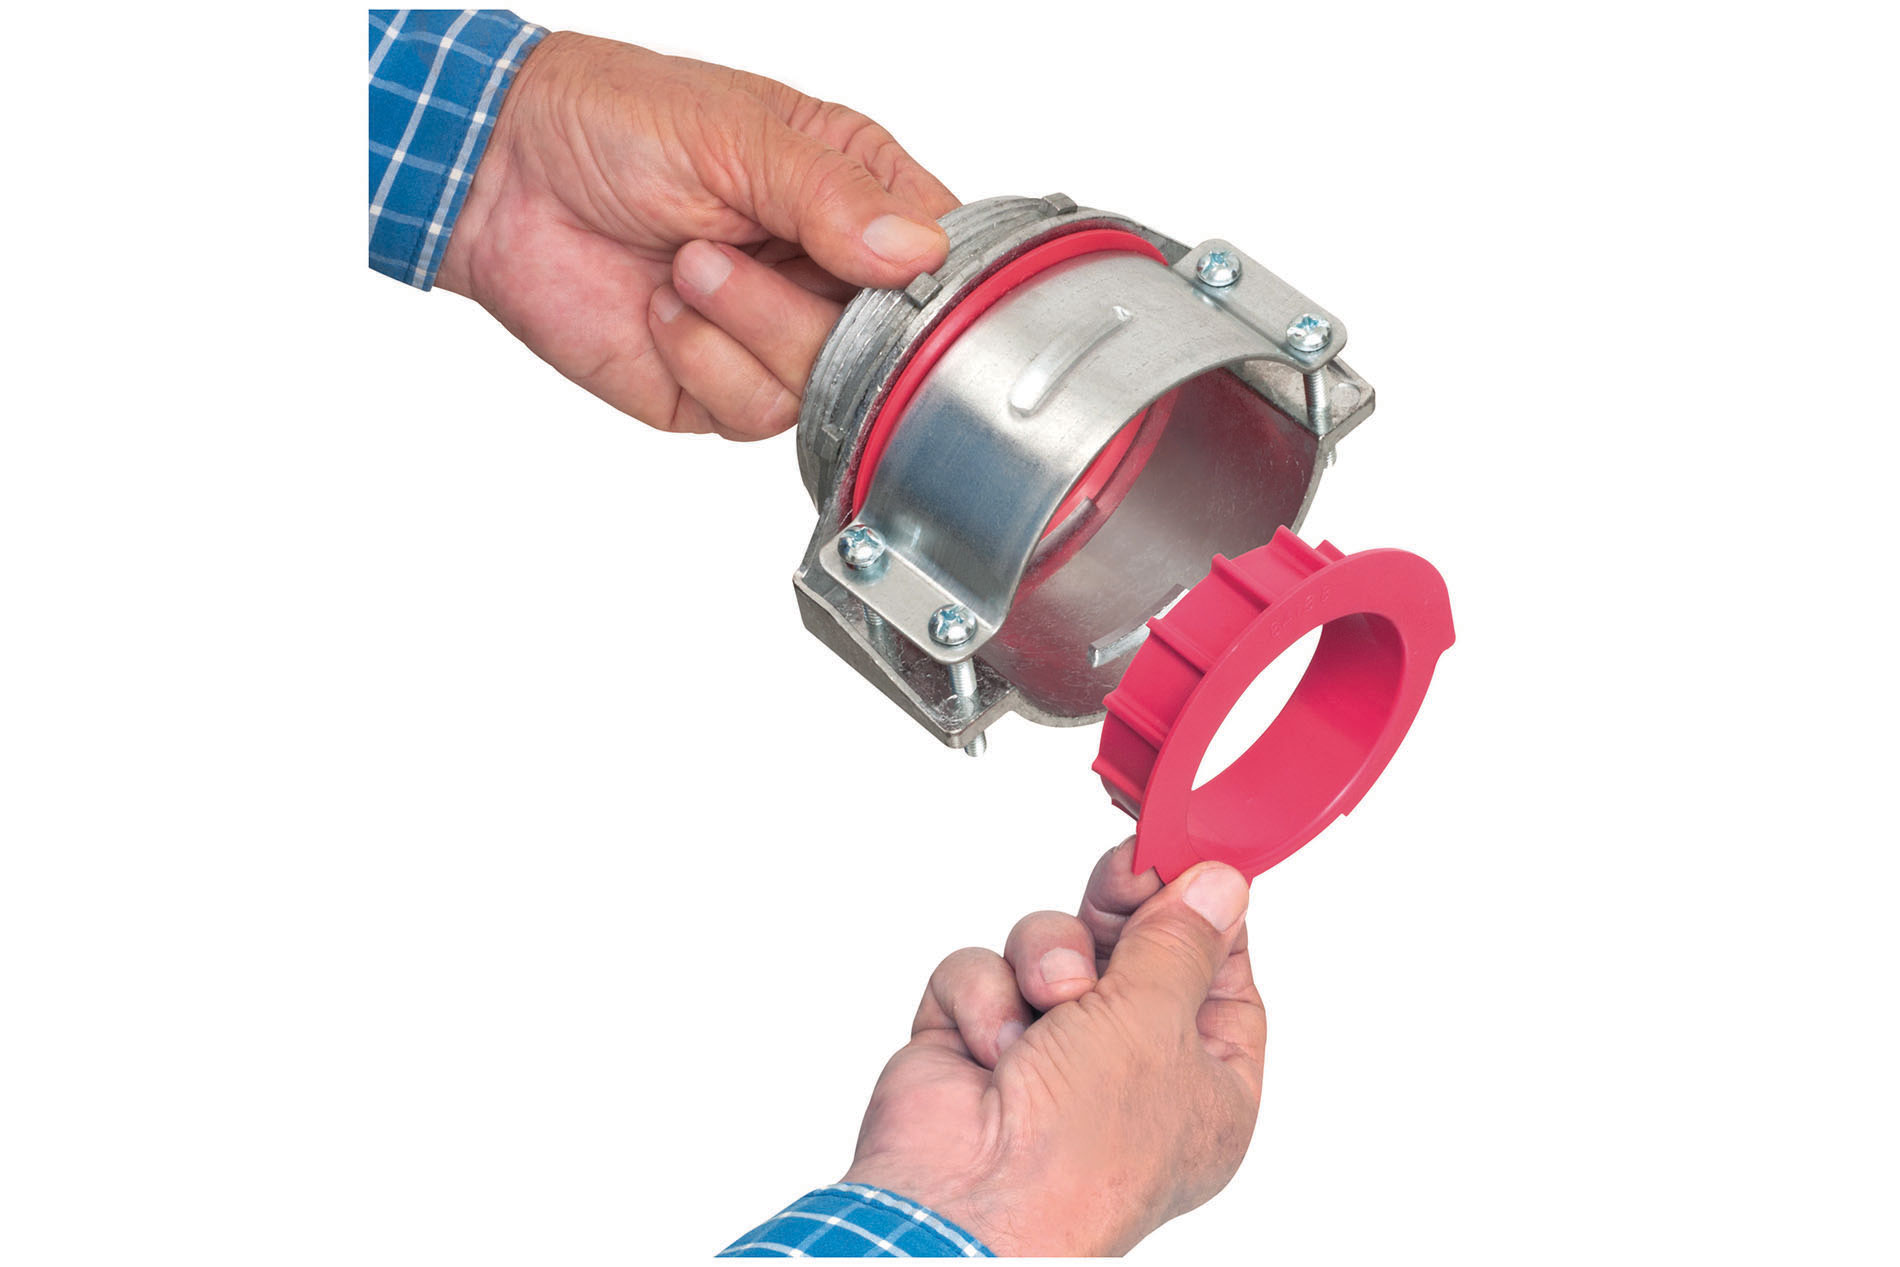 Hands hold out a red and silver cable fitting. Image by Arlington Industries.